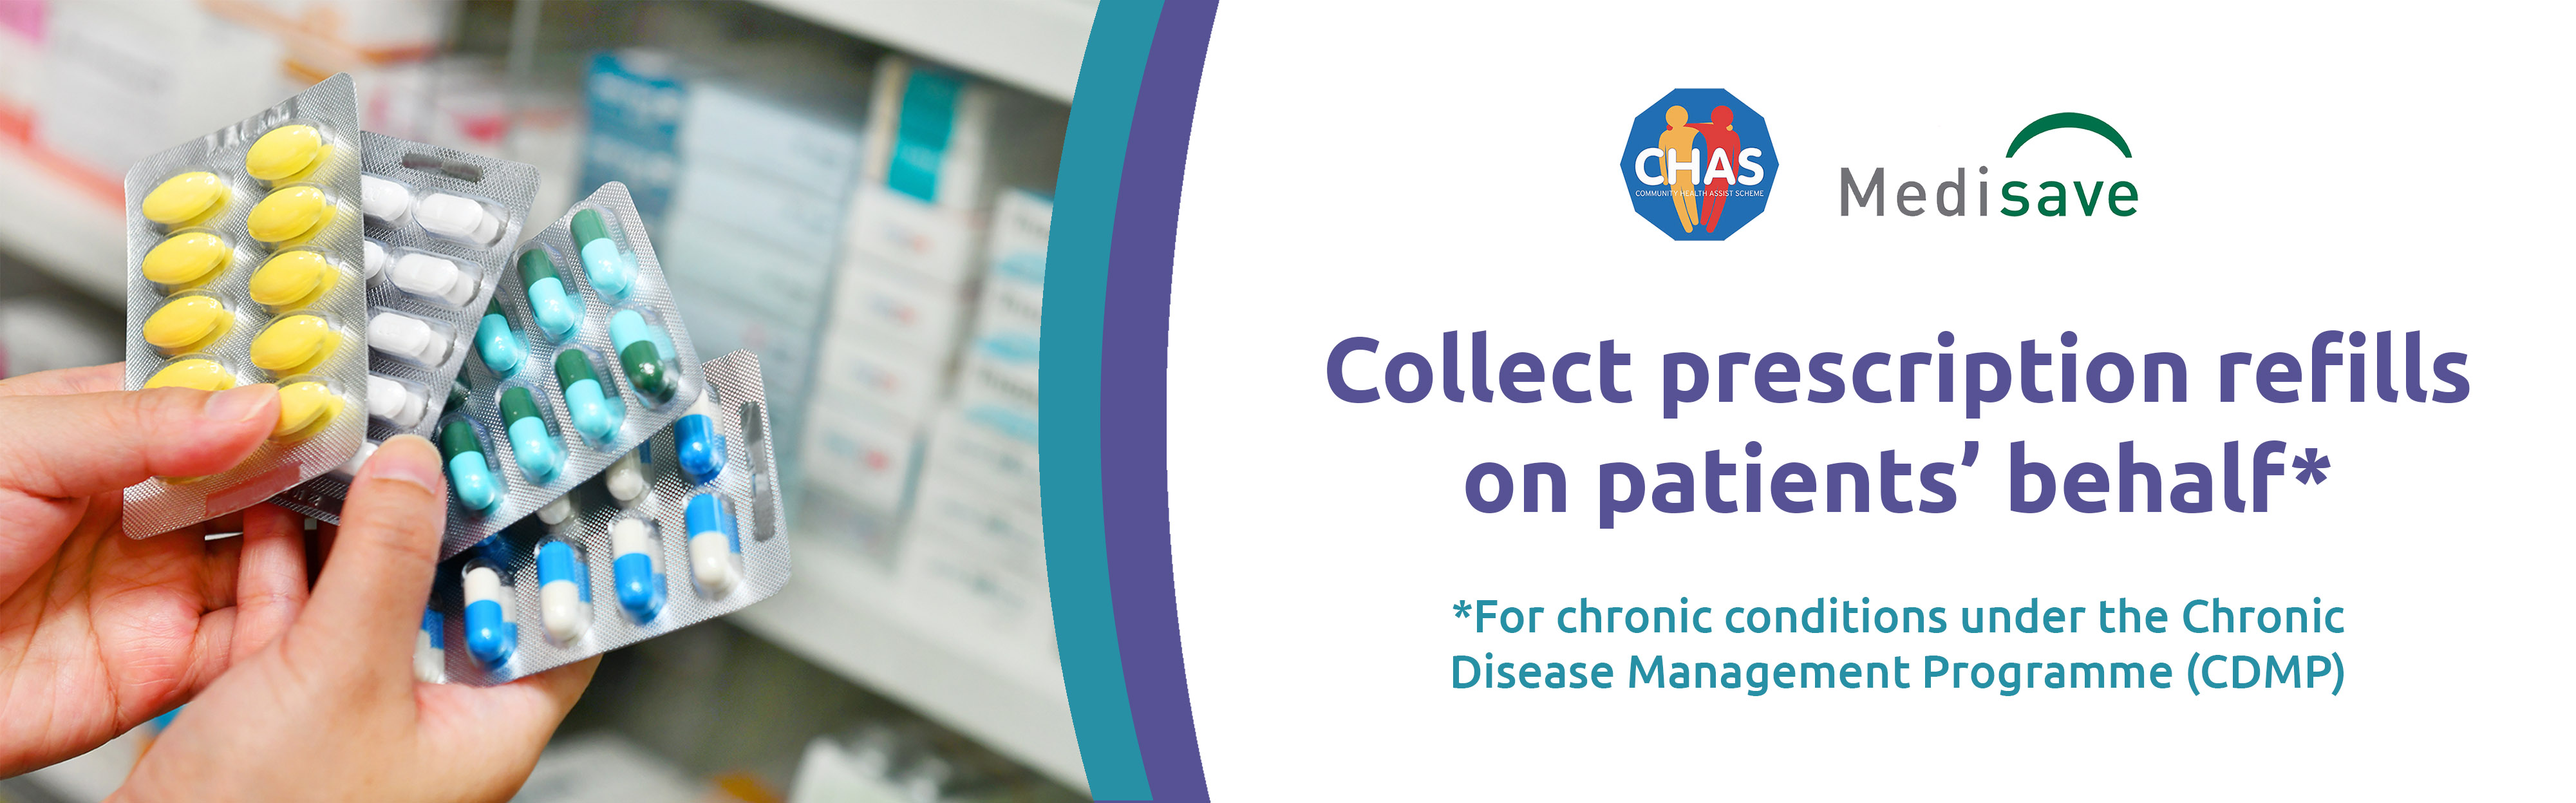 Healthway Medical provied collection of prescription refills on patients' behalf for conditions under the Chronic Disease Management Programme (cdmp)